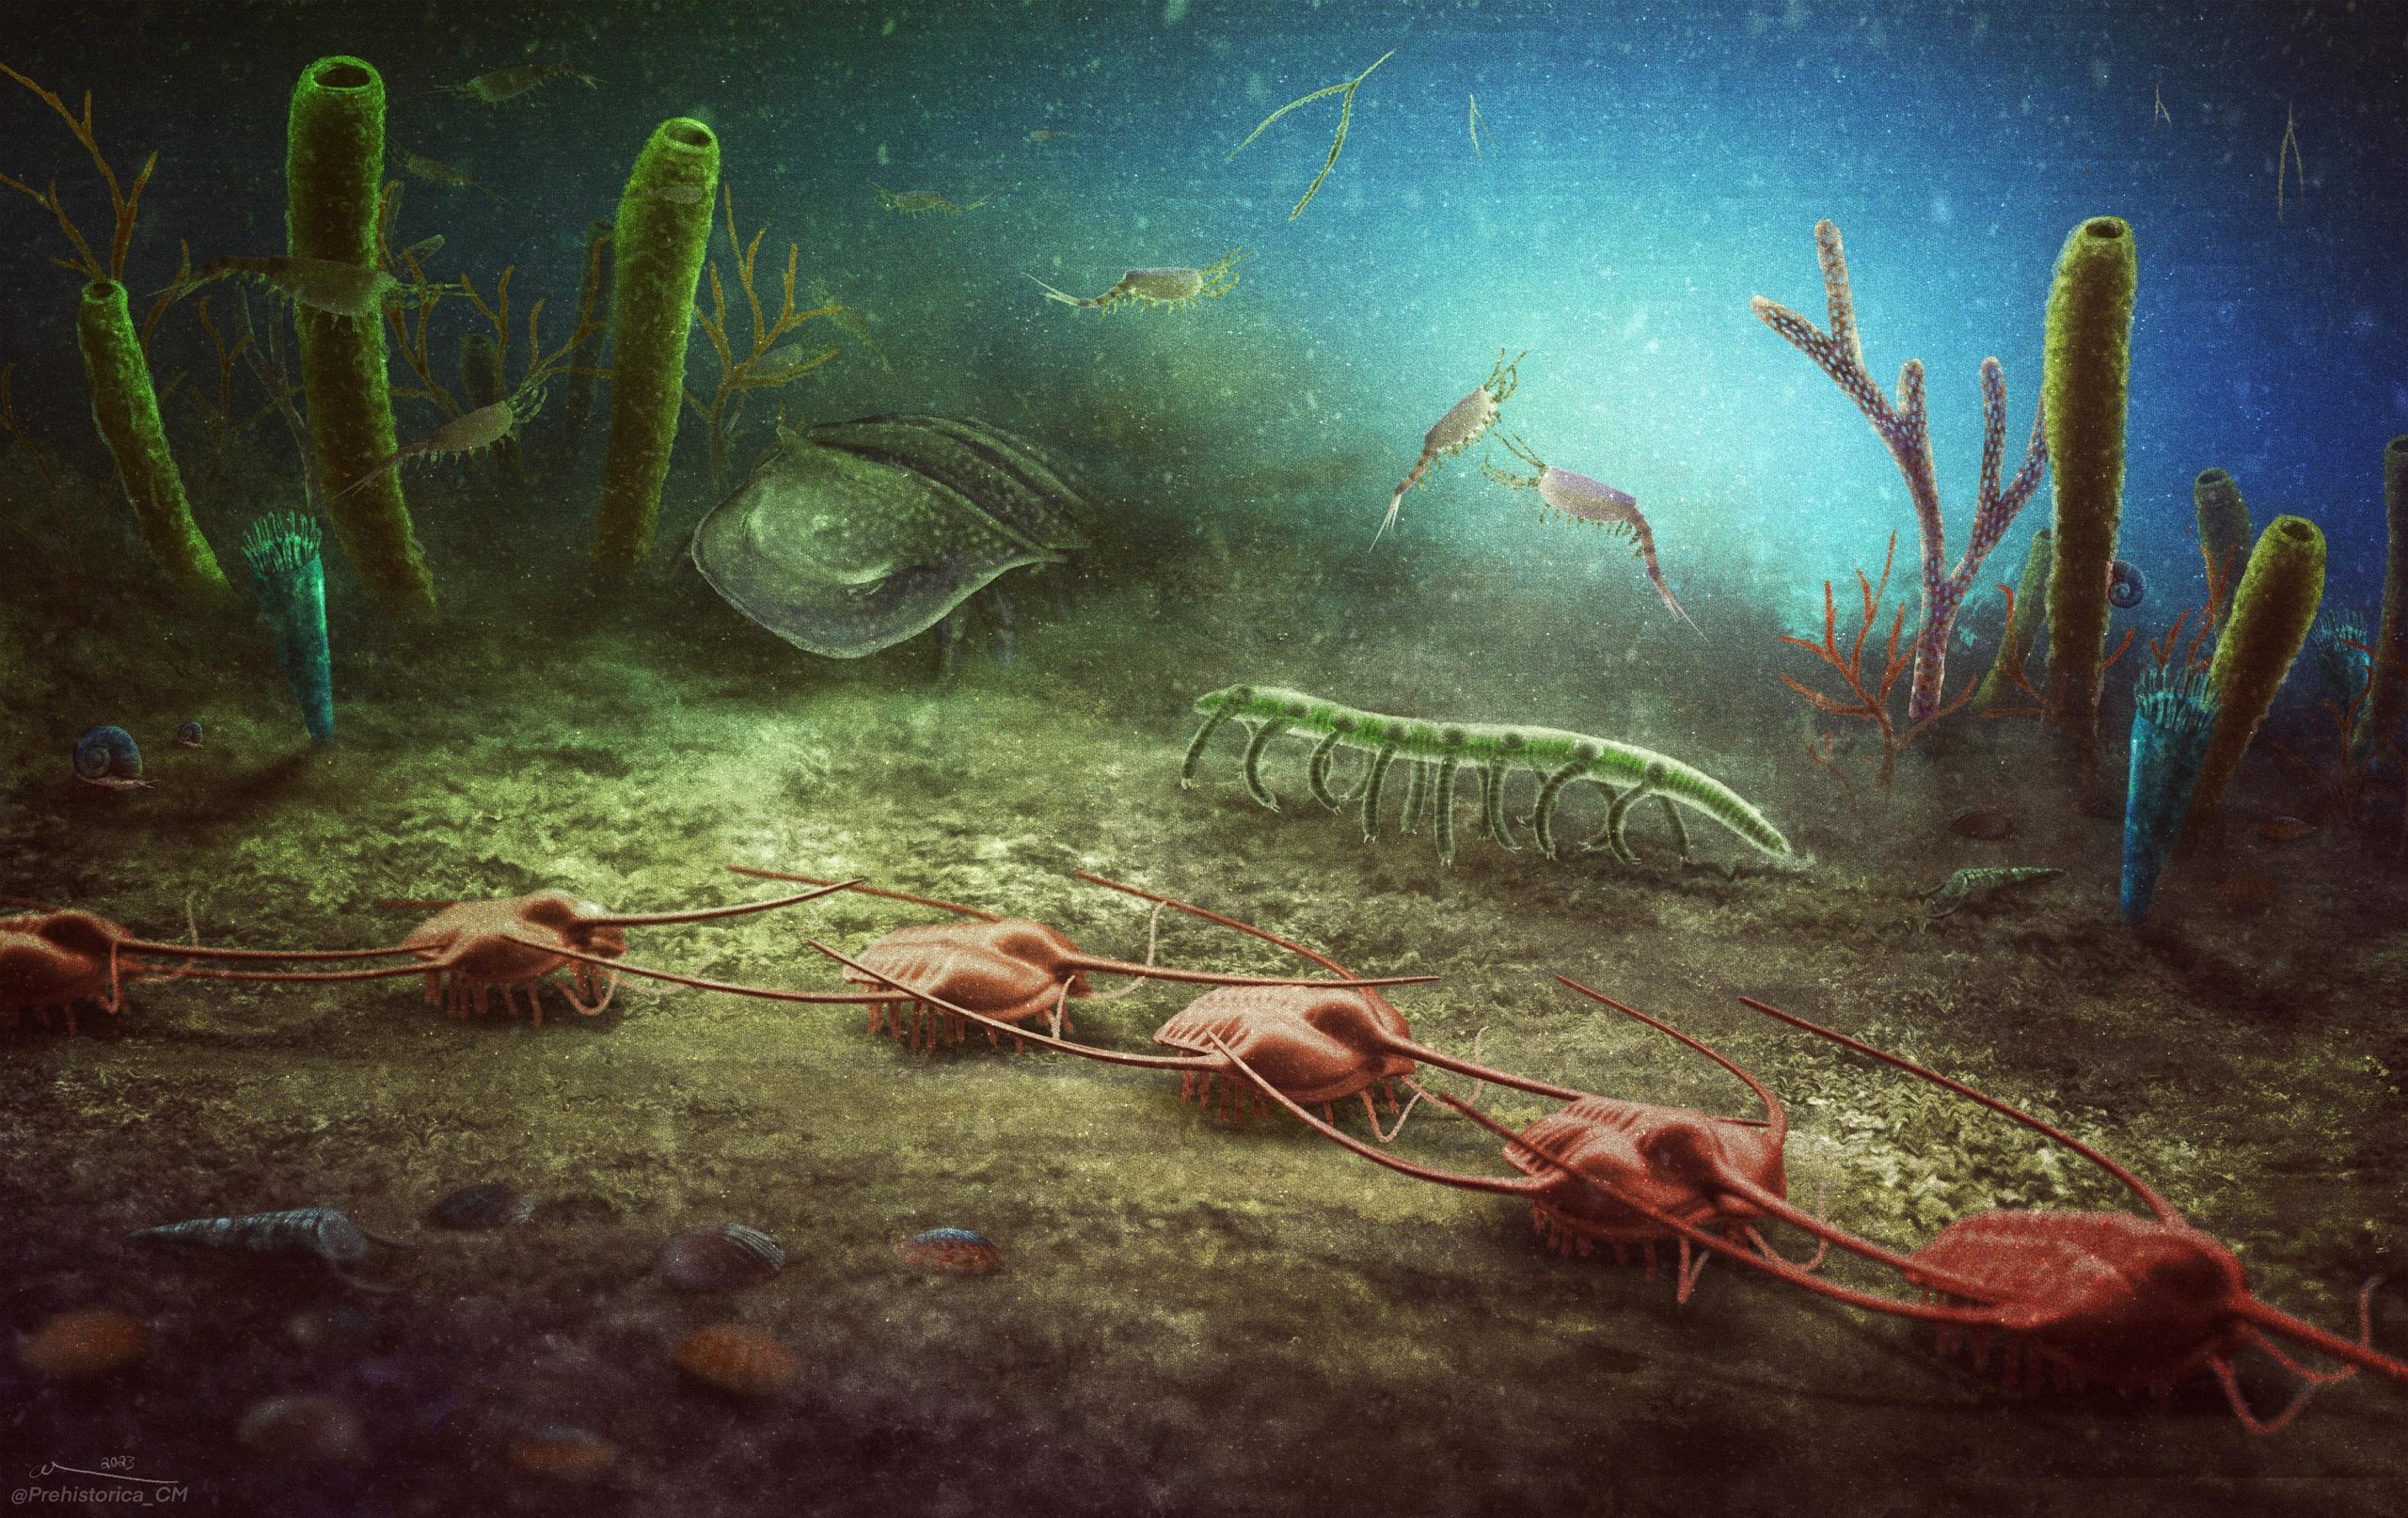 Cabrieres-Biota-Artistic-Reconstruction-scaled.jpg